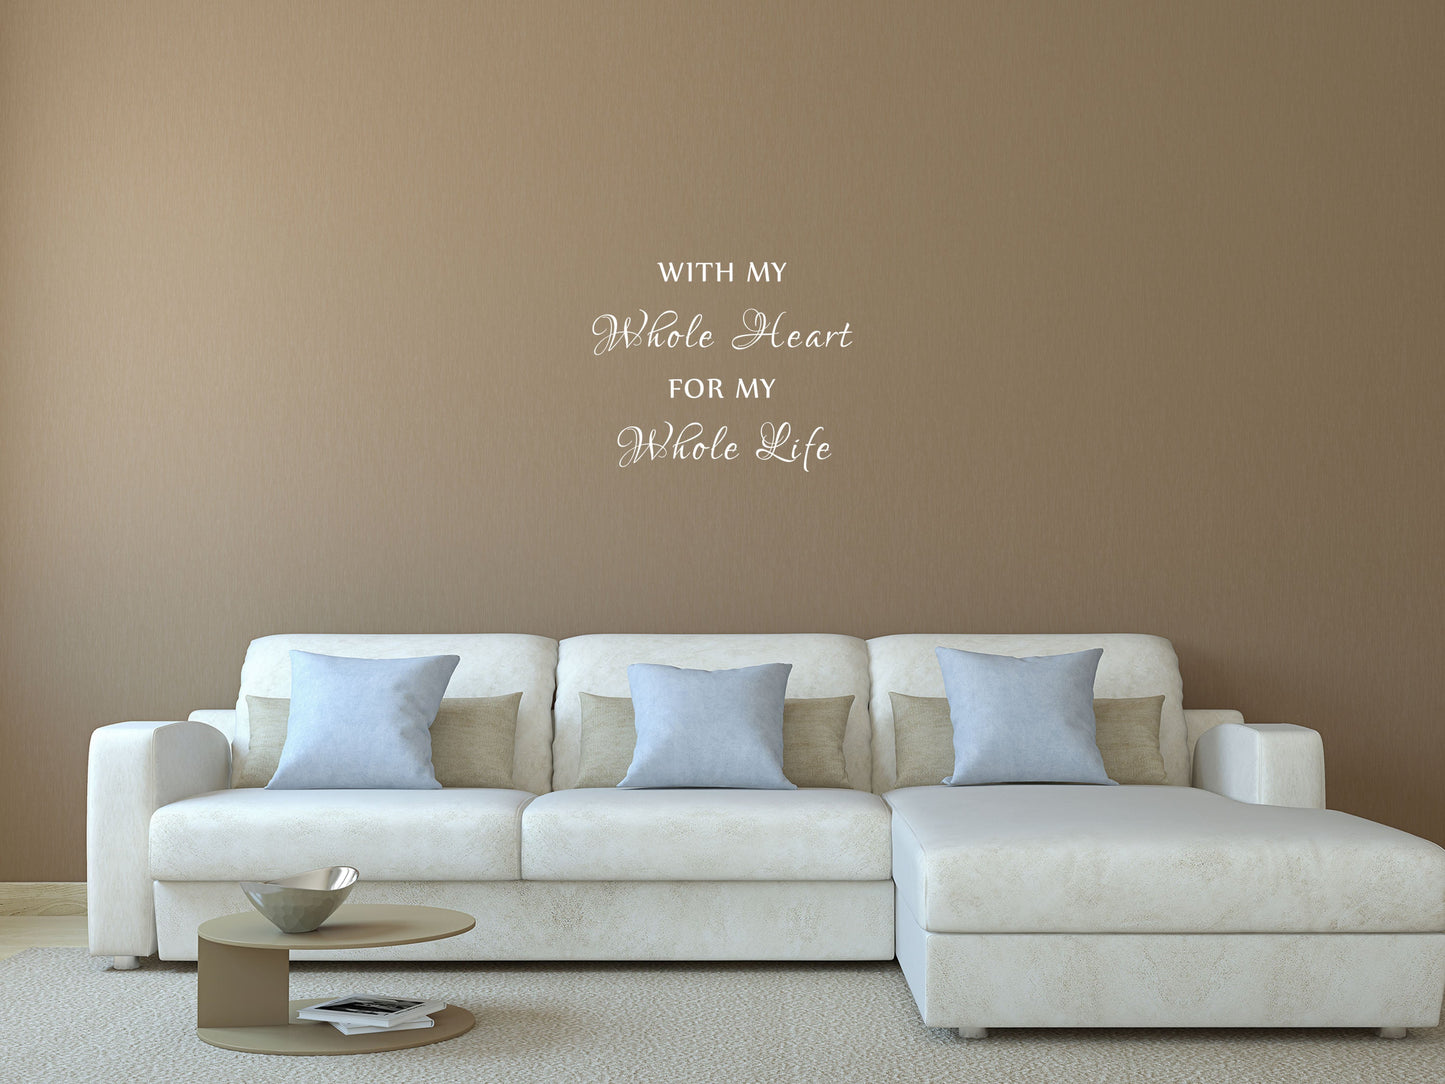 With My Whole Heart For My Whole Life Home Decor Decals Inspirational Wall Signs 